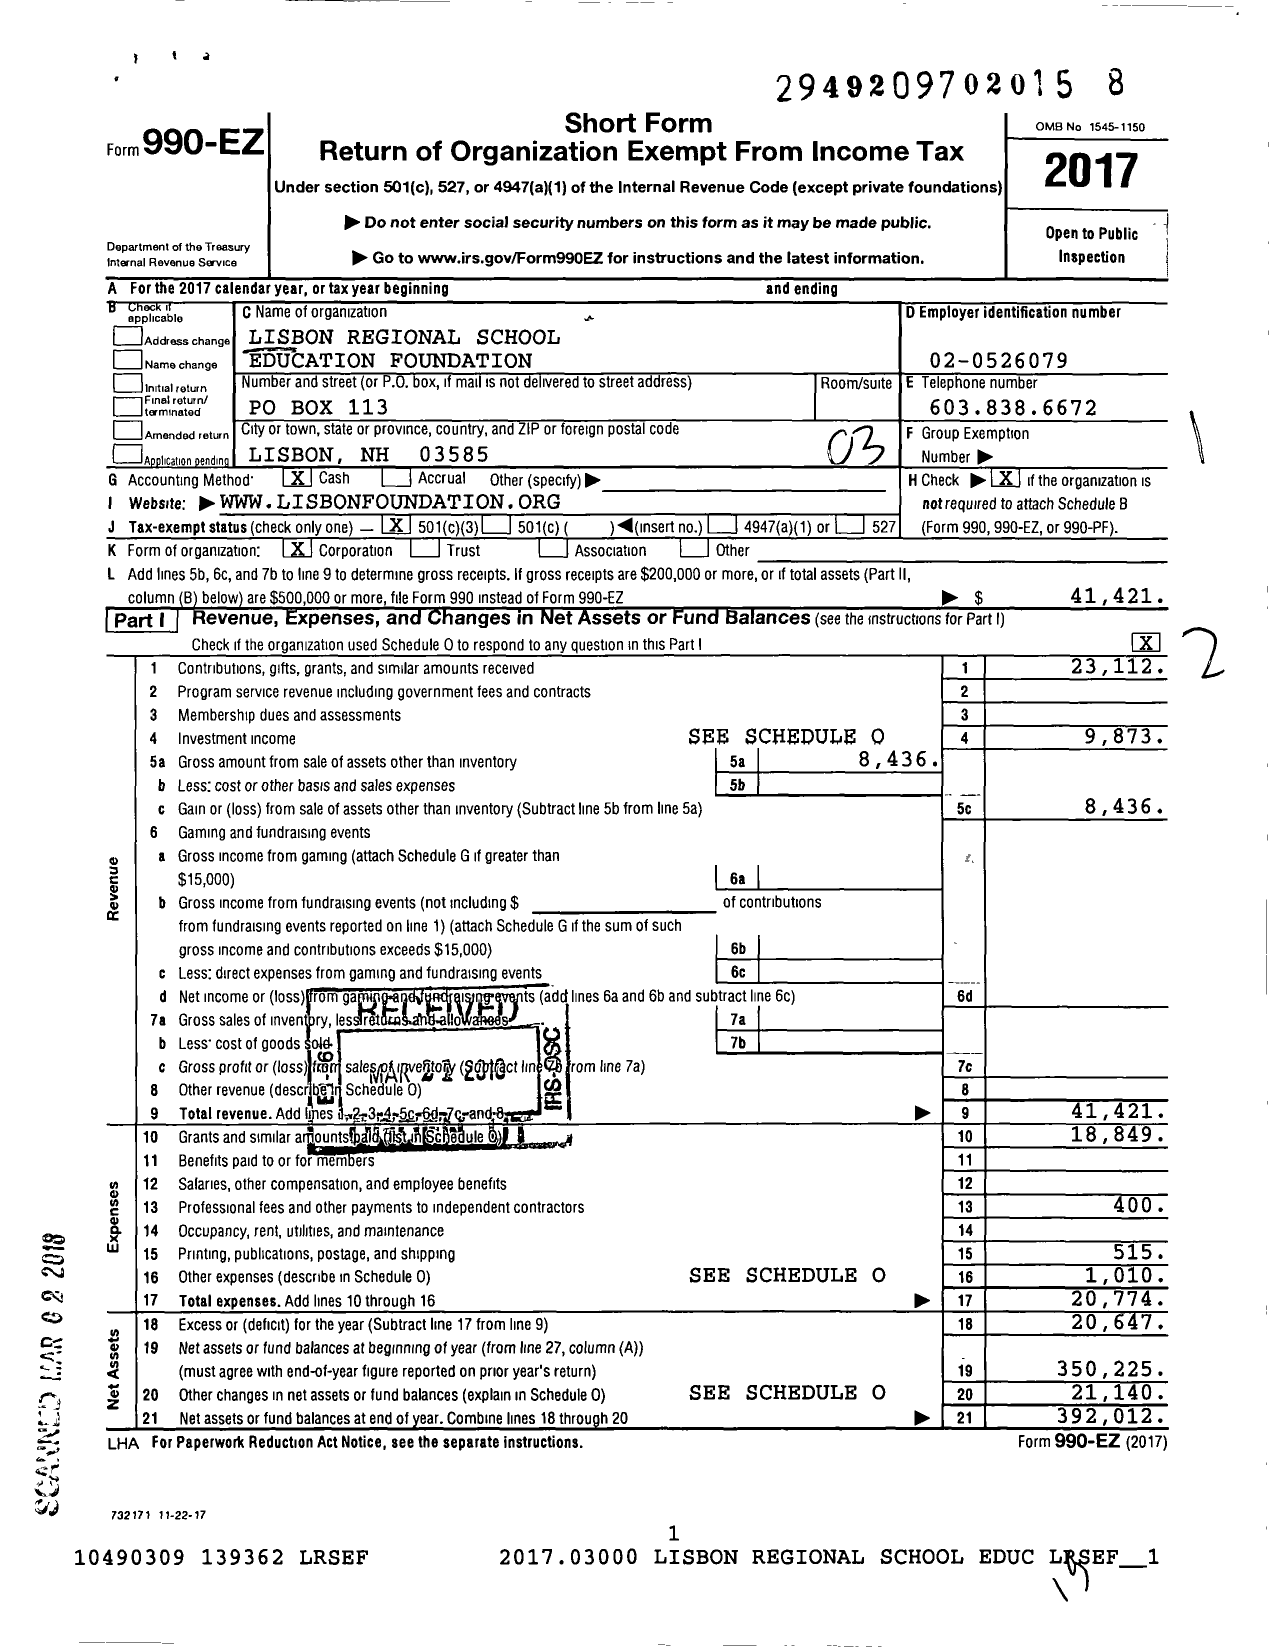 Image of first page of 2017 Form 990EZ for Lisbon Regional School Education Foundation